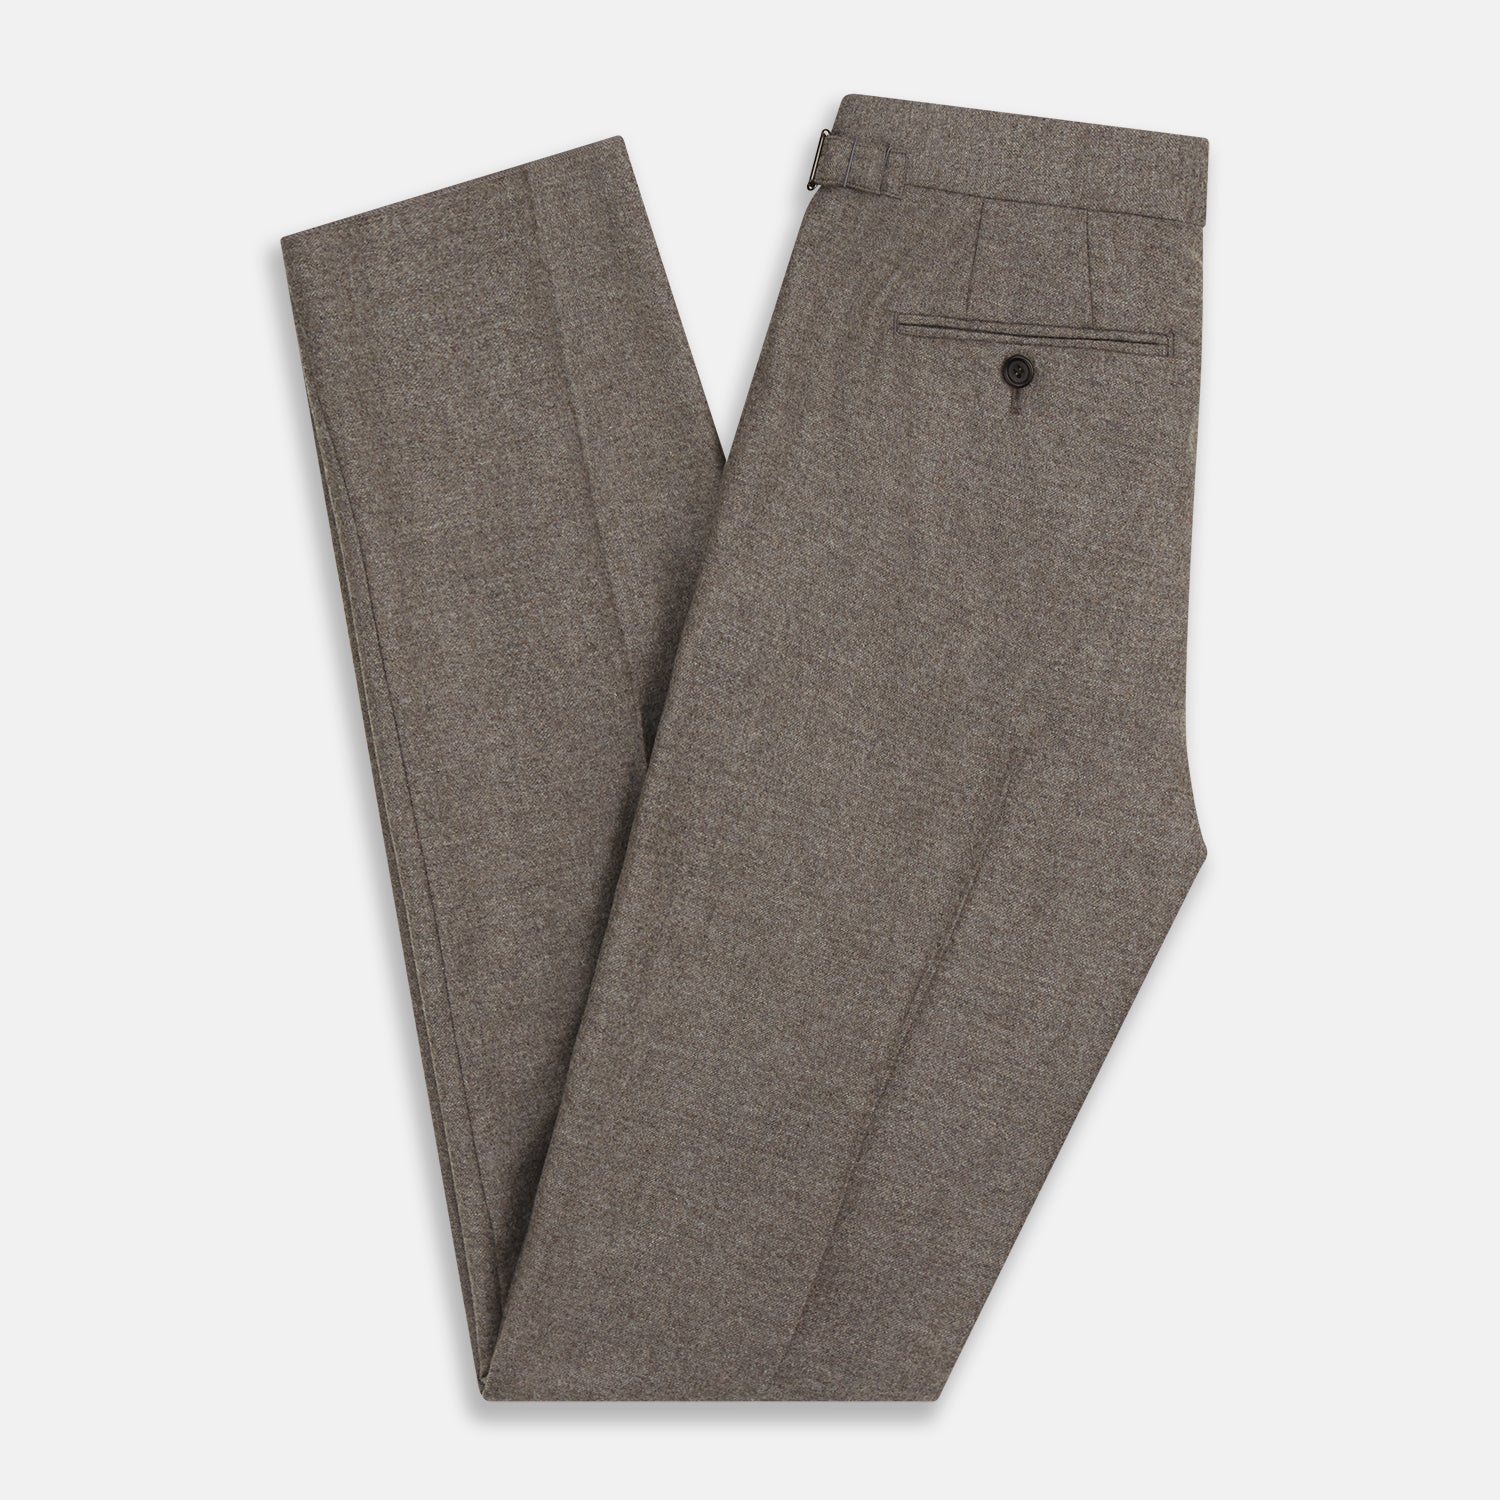 Stone Henry Trousers